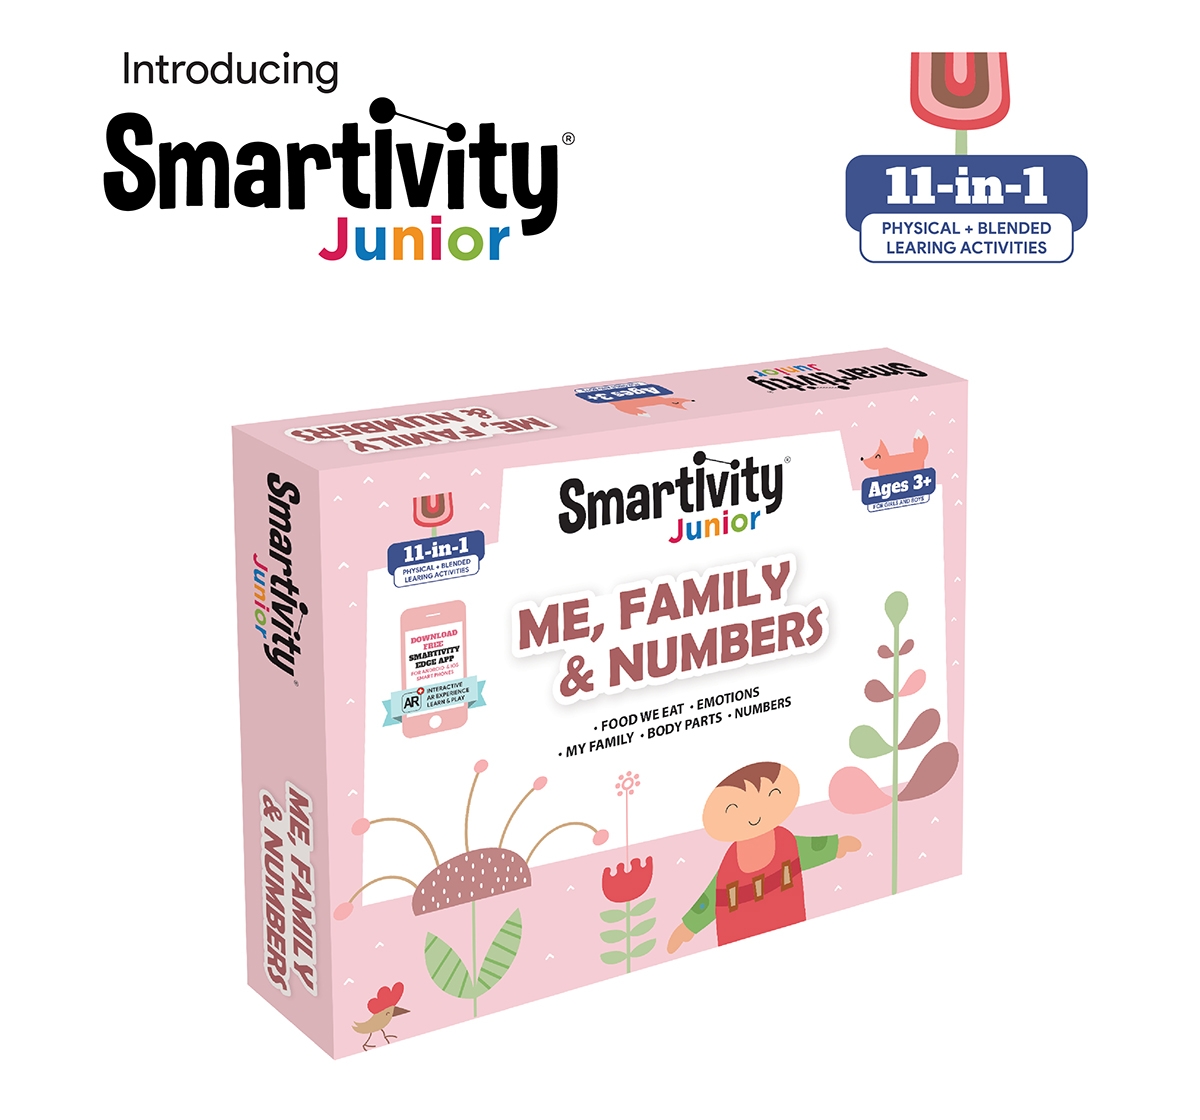 Smartivity | Smartivity Junior Me, Family & Numbers Pre-School STEAM Learning Educational Toy Art & Craft Play 11 in 1 Activity Kit